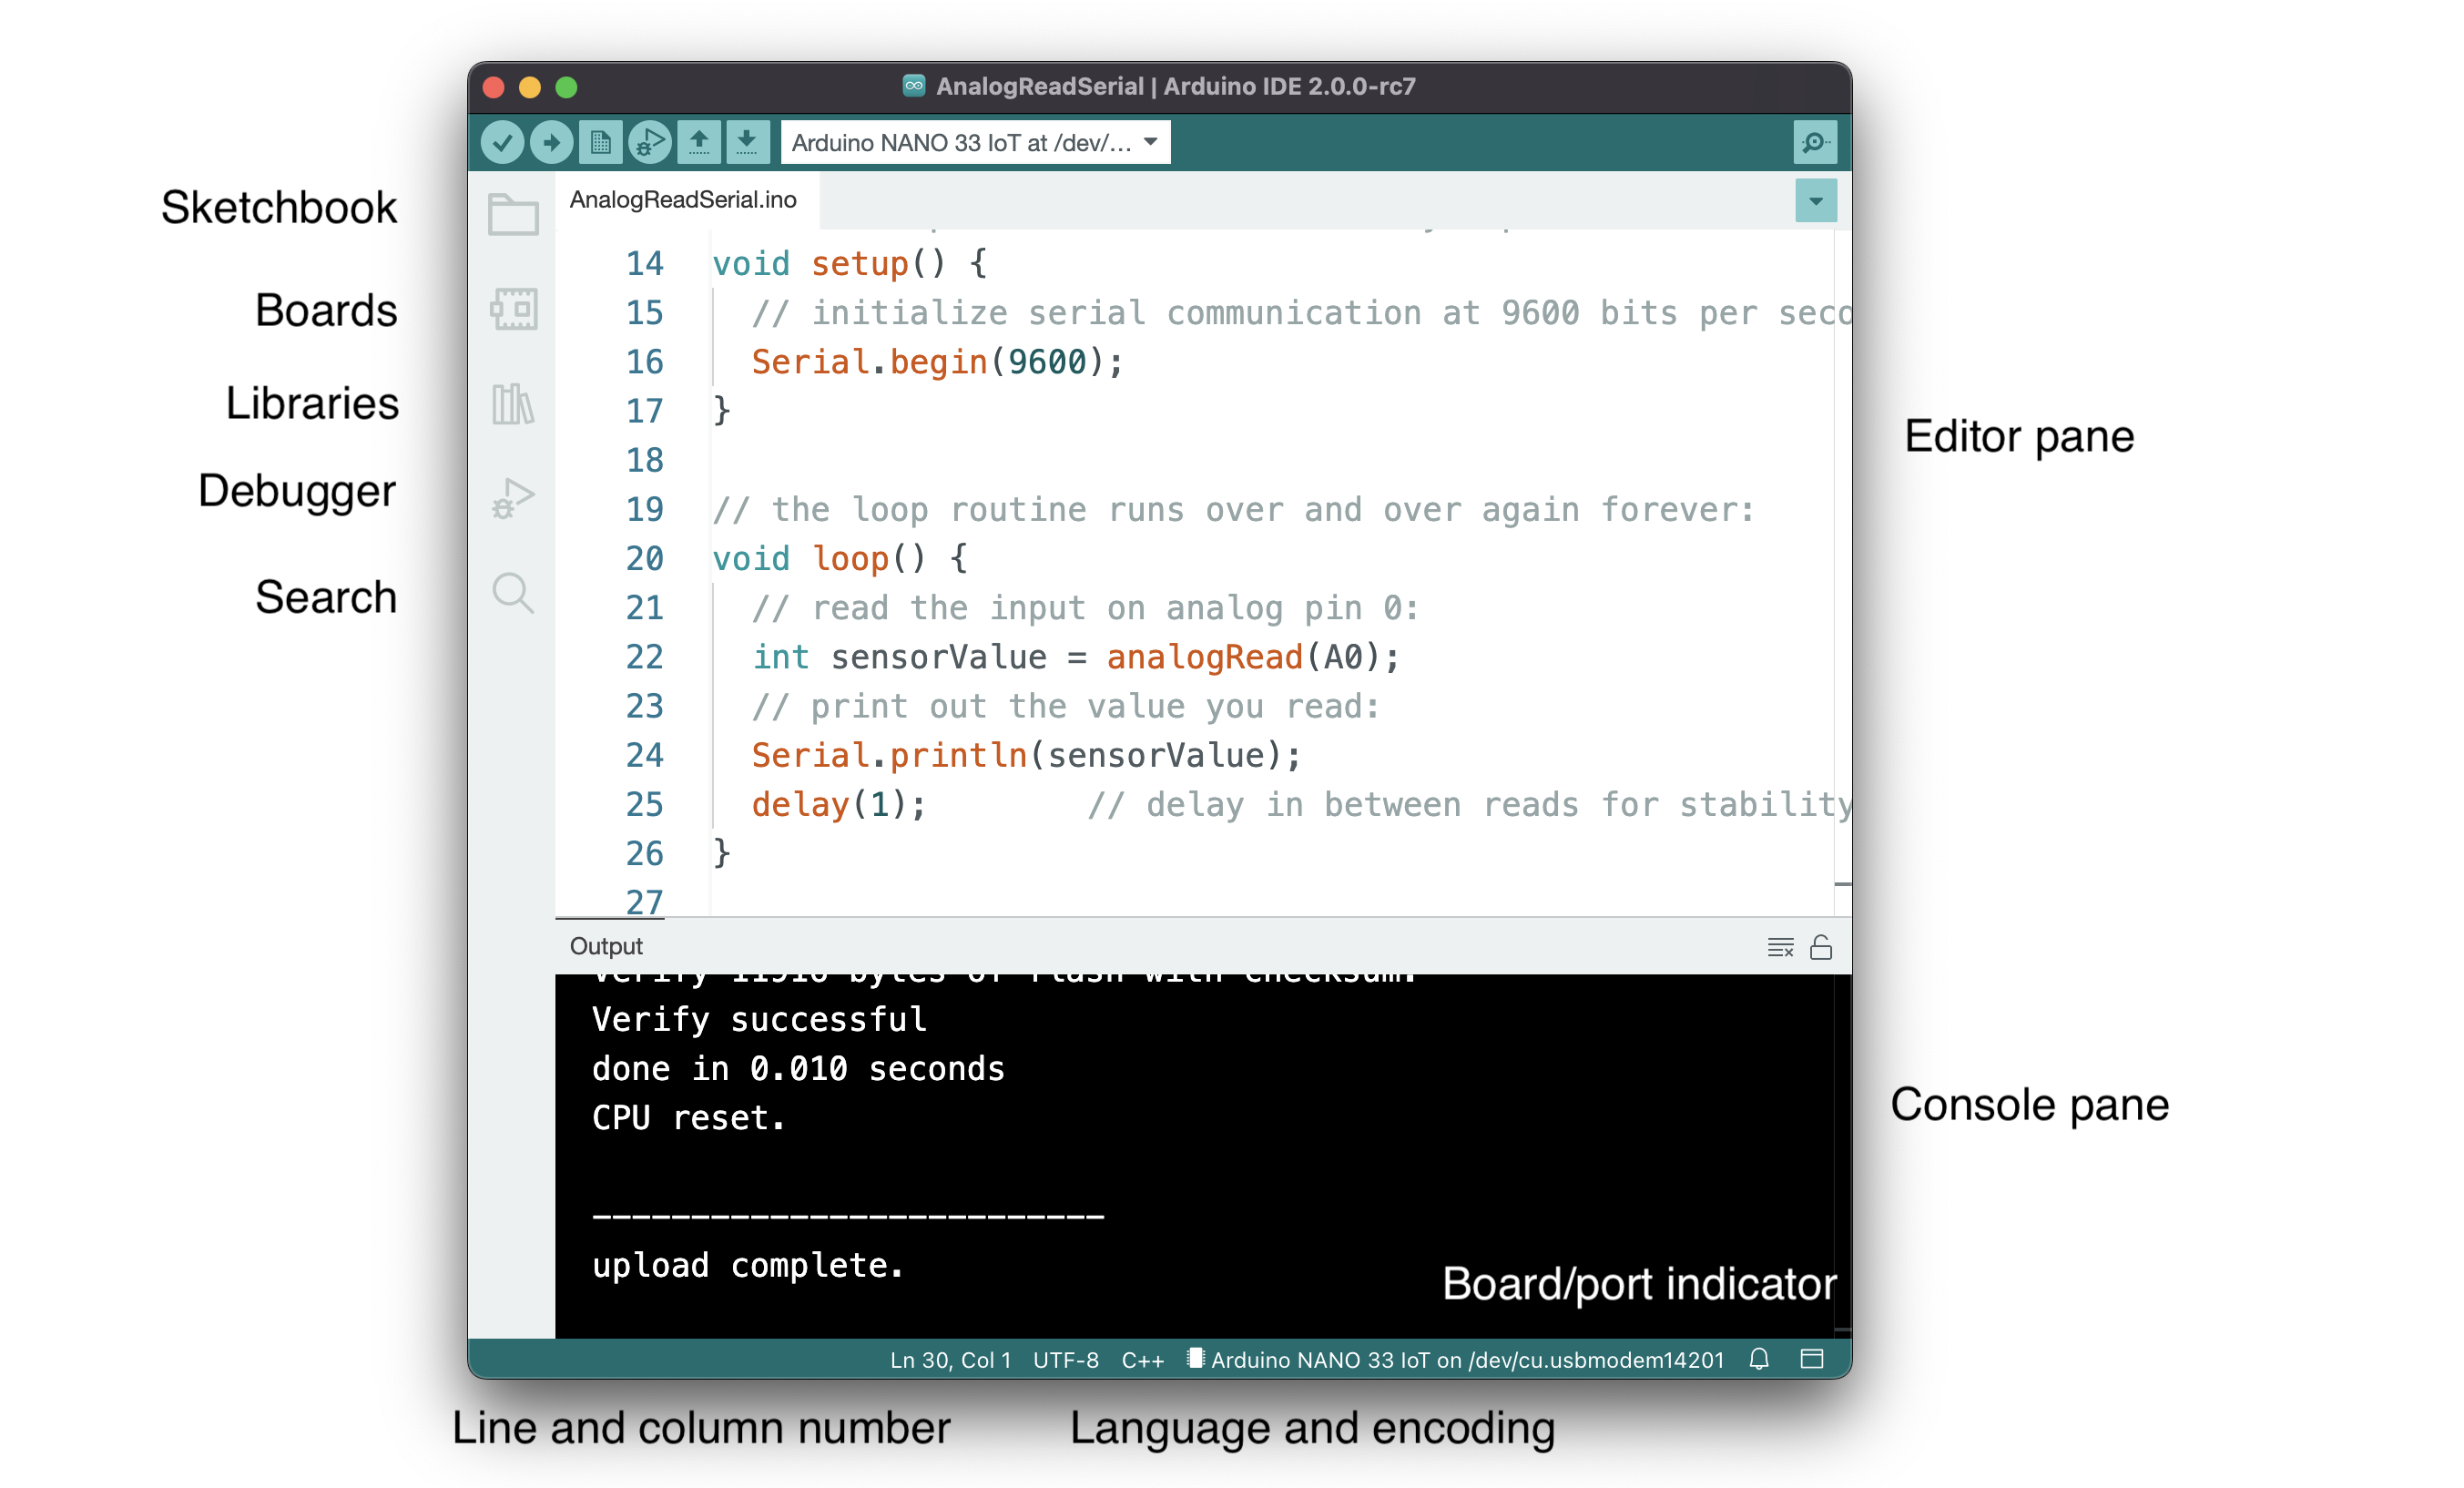 Screenshot of the Arduino 2.0 IDE showing some of the features.